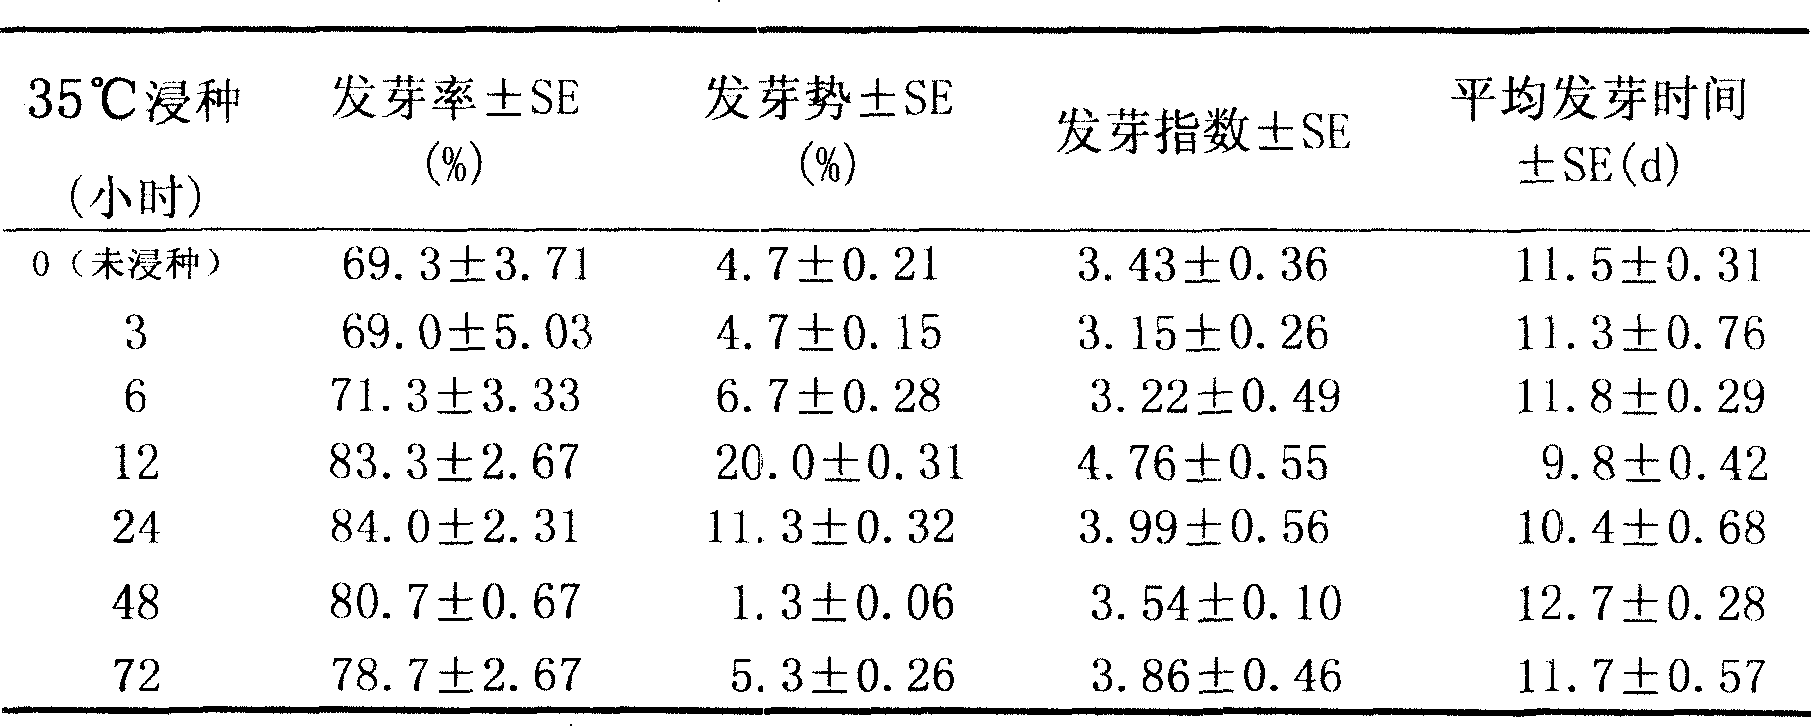 Leymus chinensis high-temperature seed presoaking and temperature changing combination germinating method